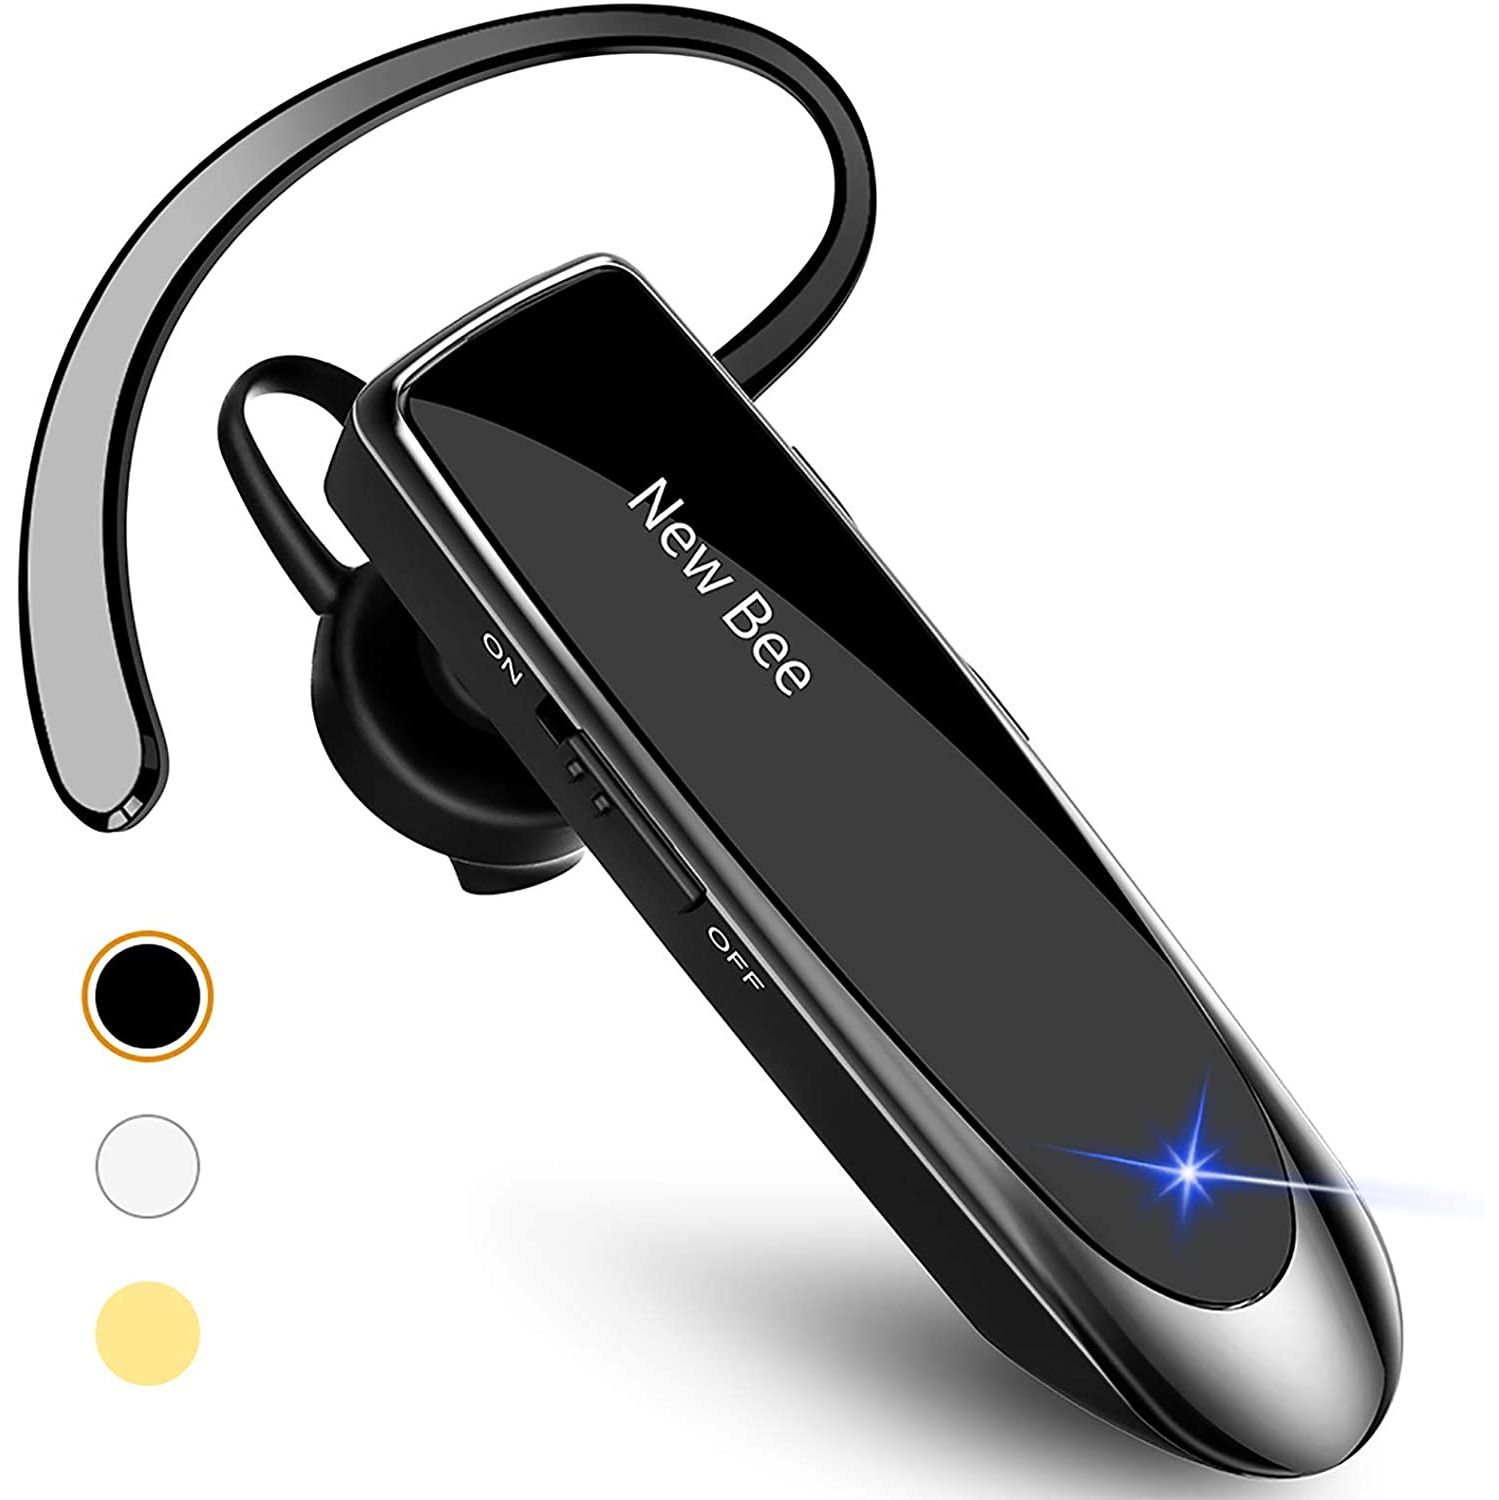 Bluetooth Headset New Bee 24Hrs V5.0 Bluetooth Earpiece Wireless Handsfree Driving Headset with Noise Canceling Mic Headset Case for iPhone Samsung Android Mobile Cell Phone Tablets Office Truck Drive